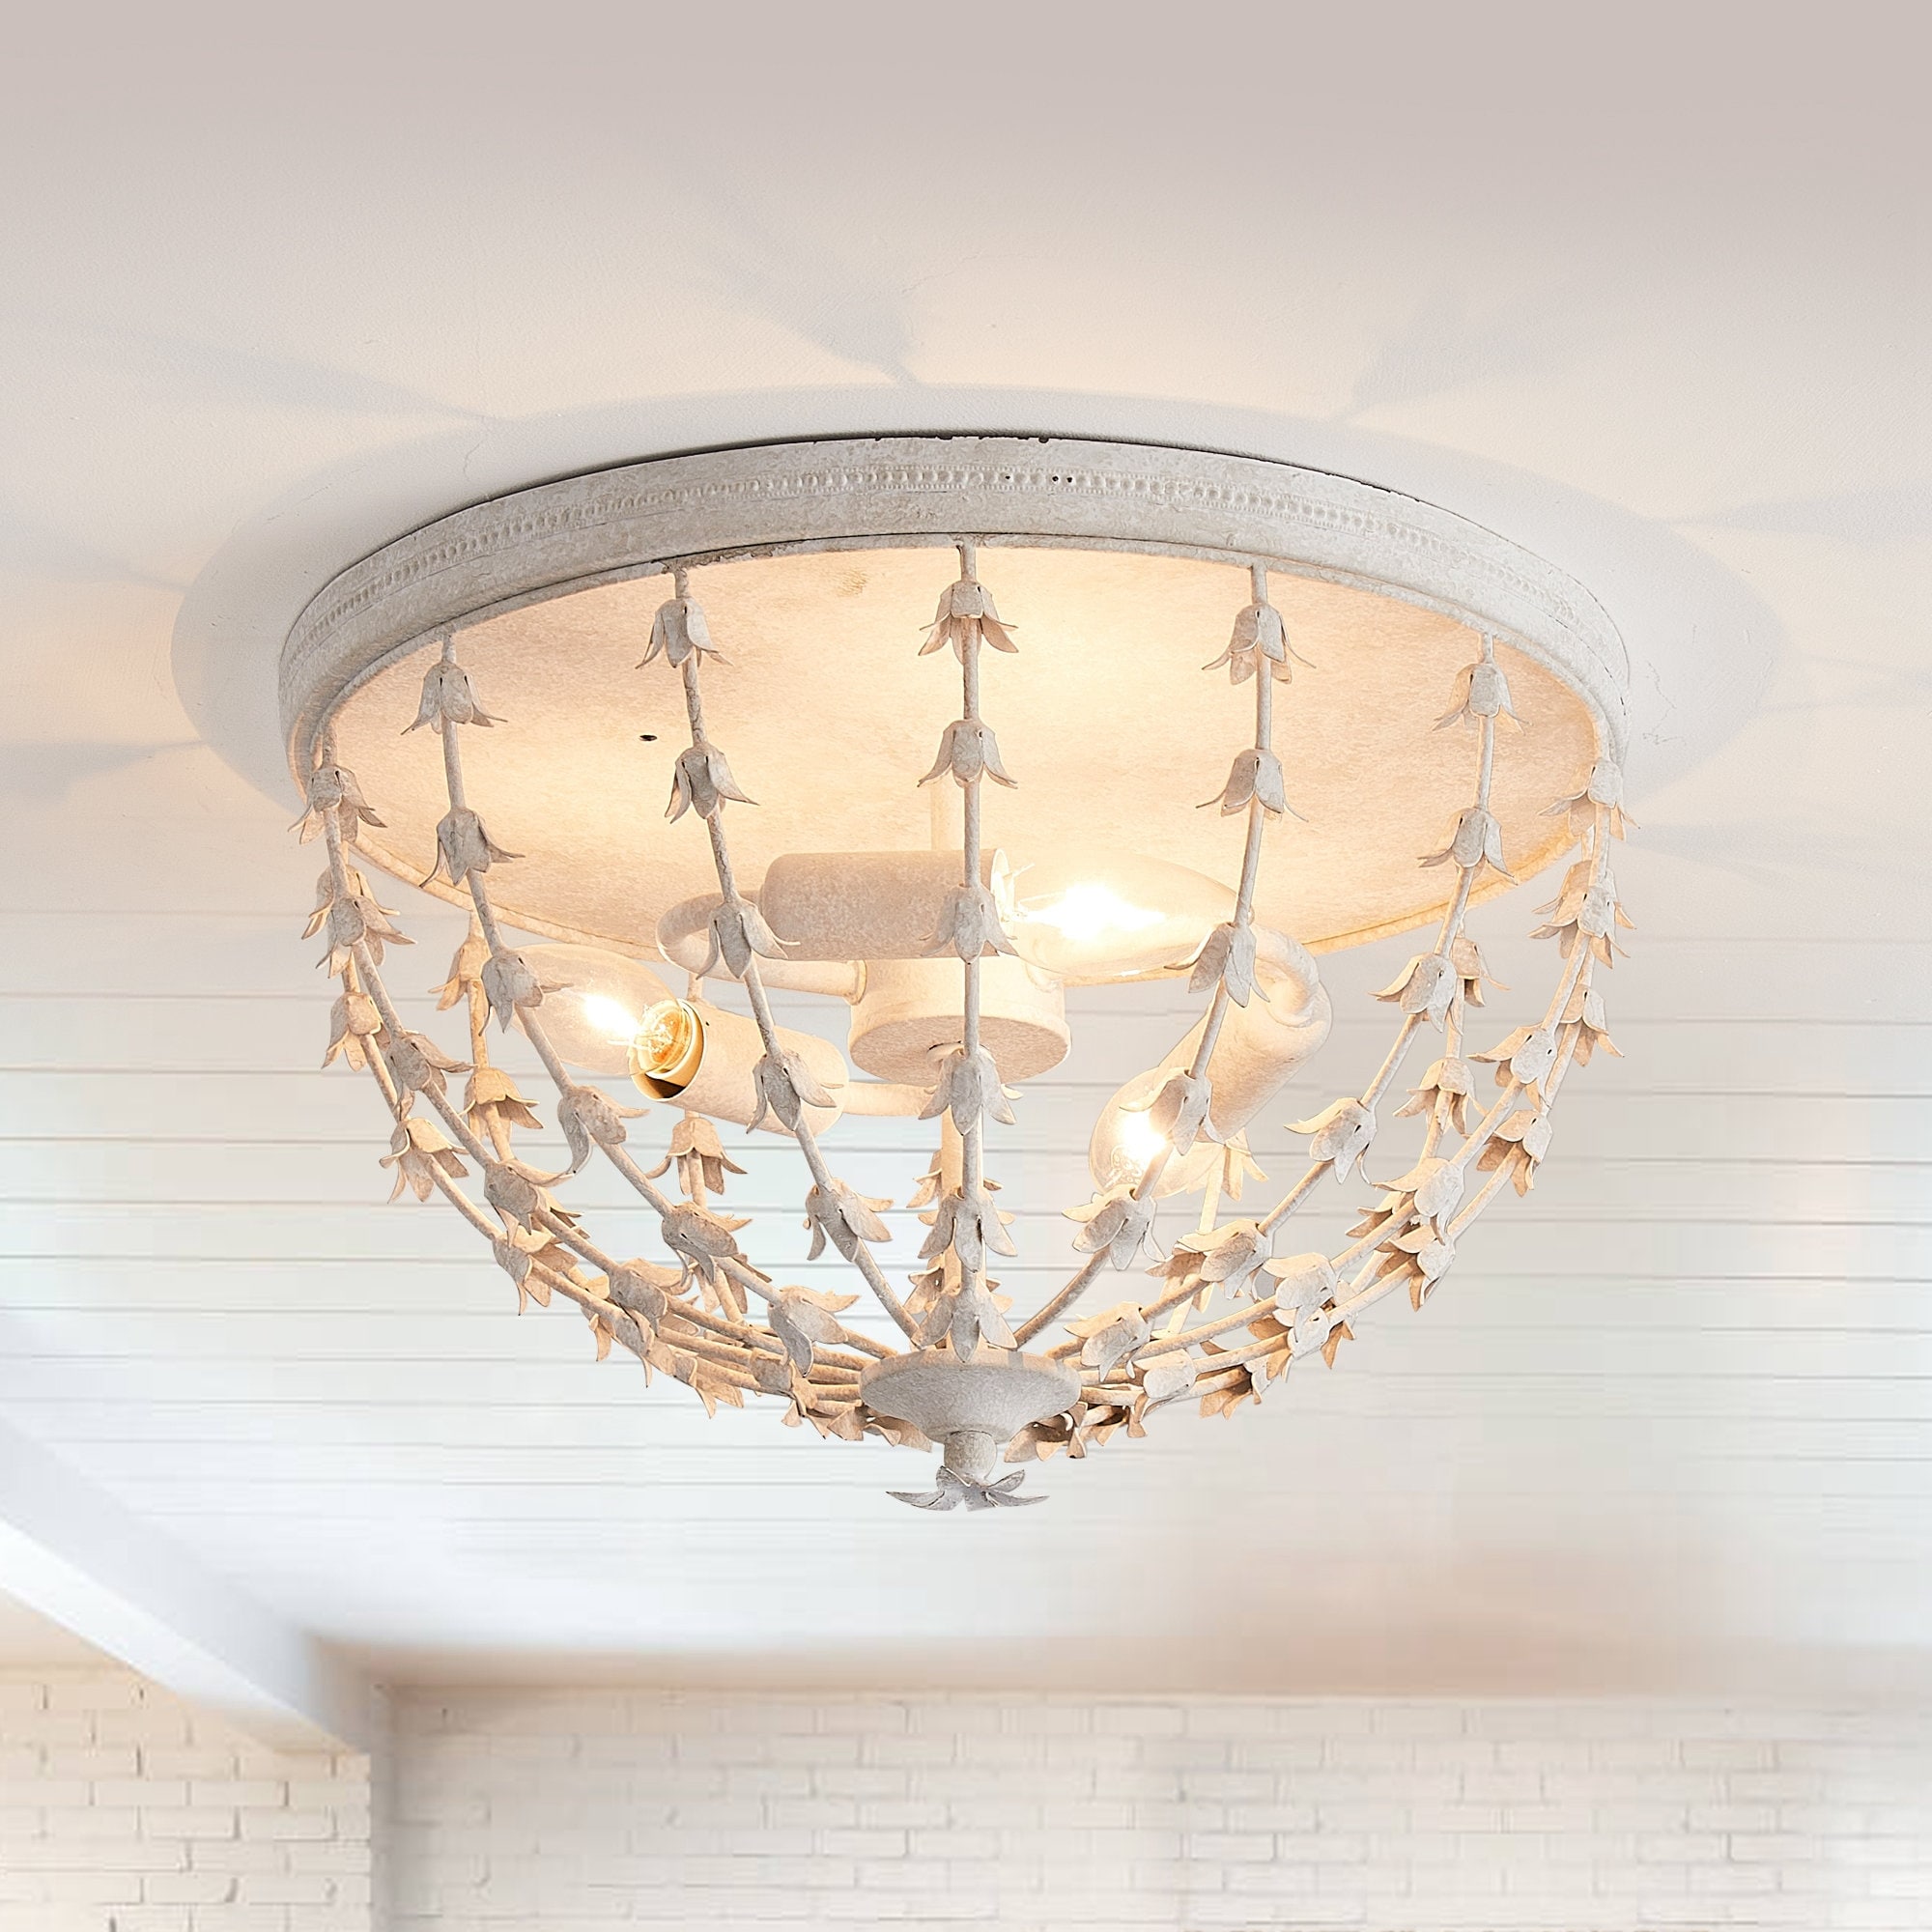 13 to 24 Inches, Mid-Century Modern Flush Mount Ceiling Lights - Bed Bath &  Beyond